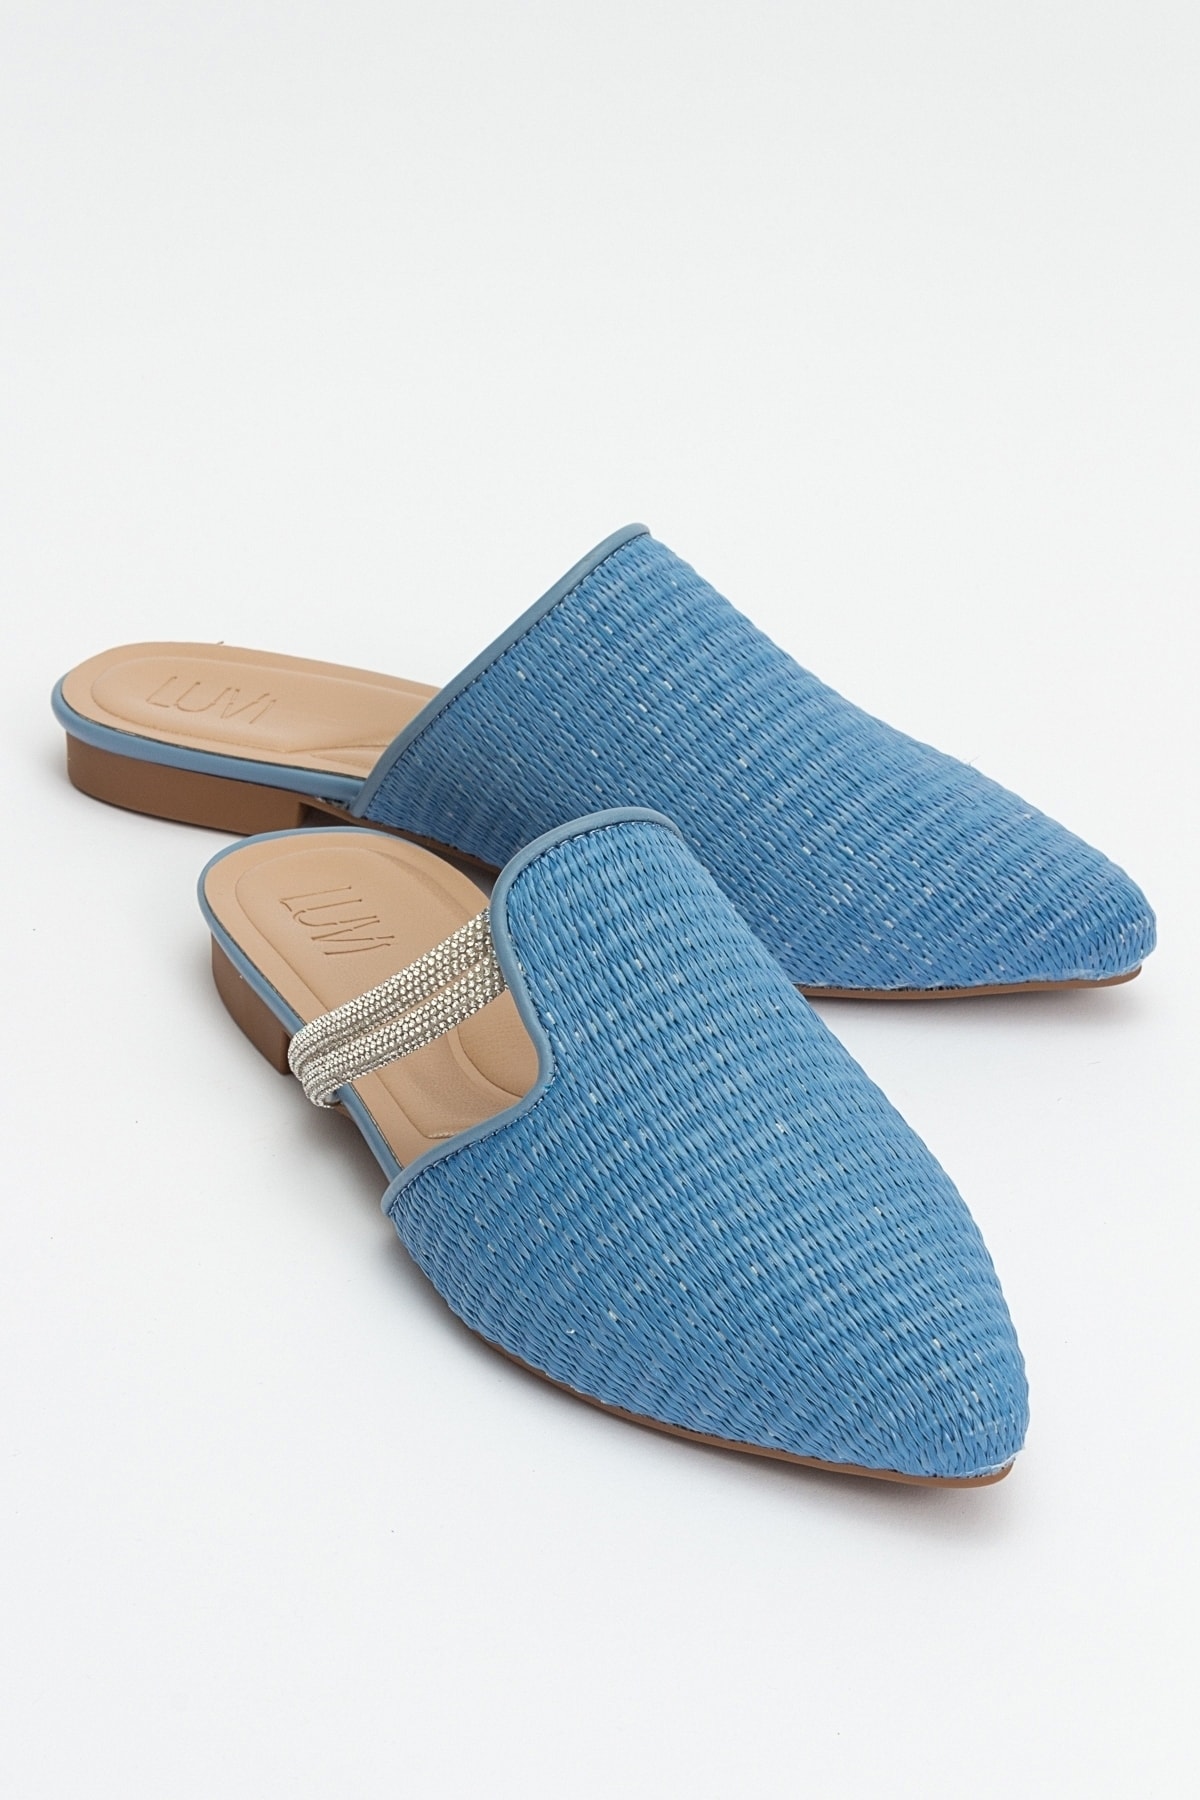 Levně LuviShoes PESA Blue Women's Slippers with Straw Stones